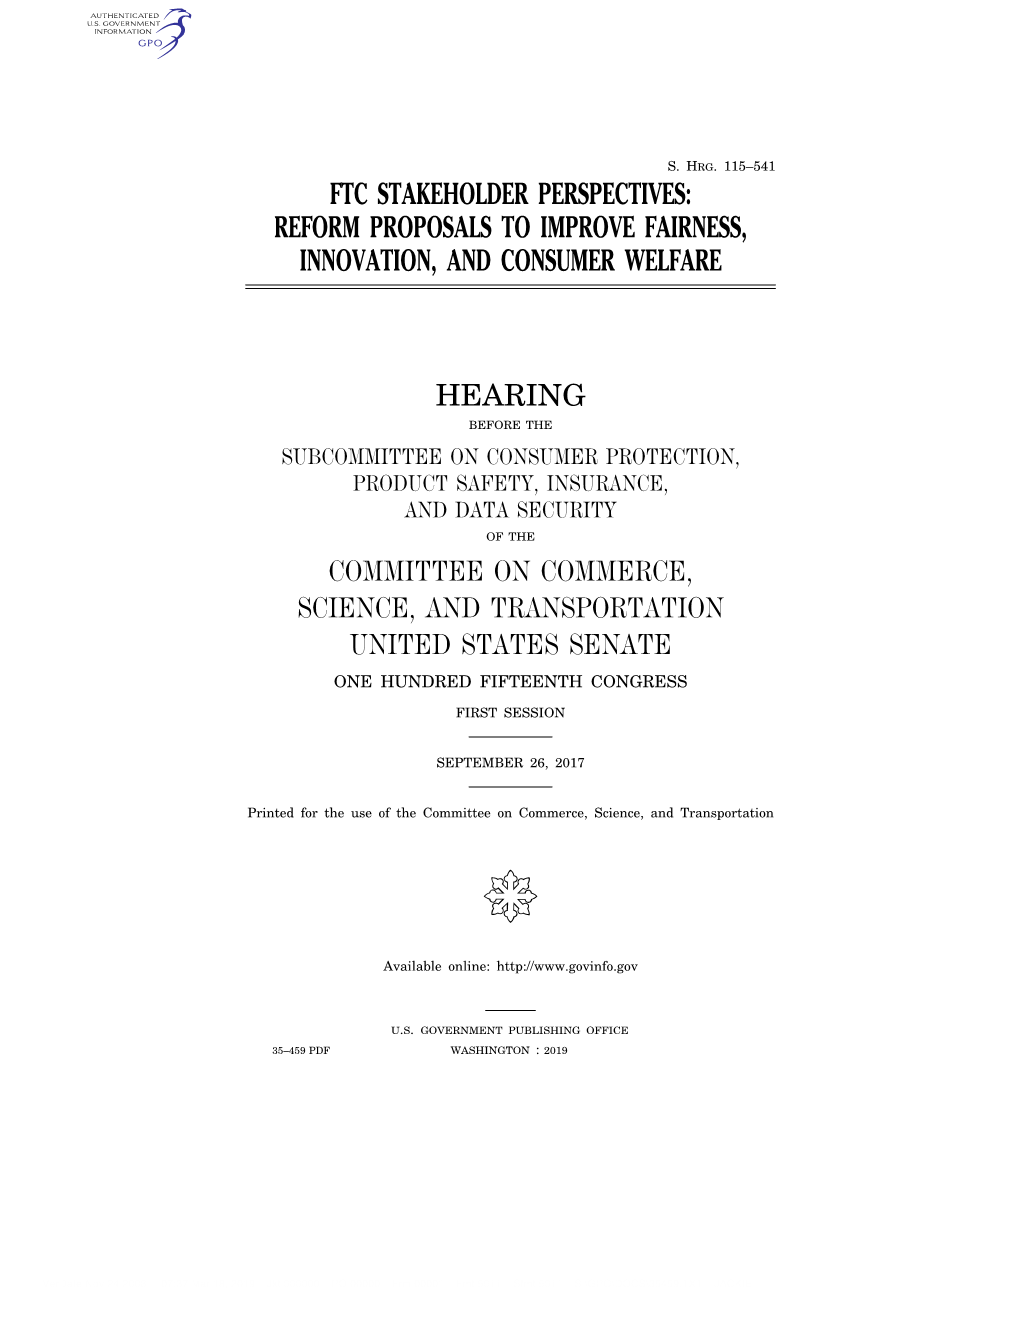 Ftc Stakeholder Perspectives: Reform Proposals to Improve Fairness, Innovation, and Consumer Welfare